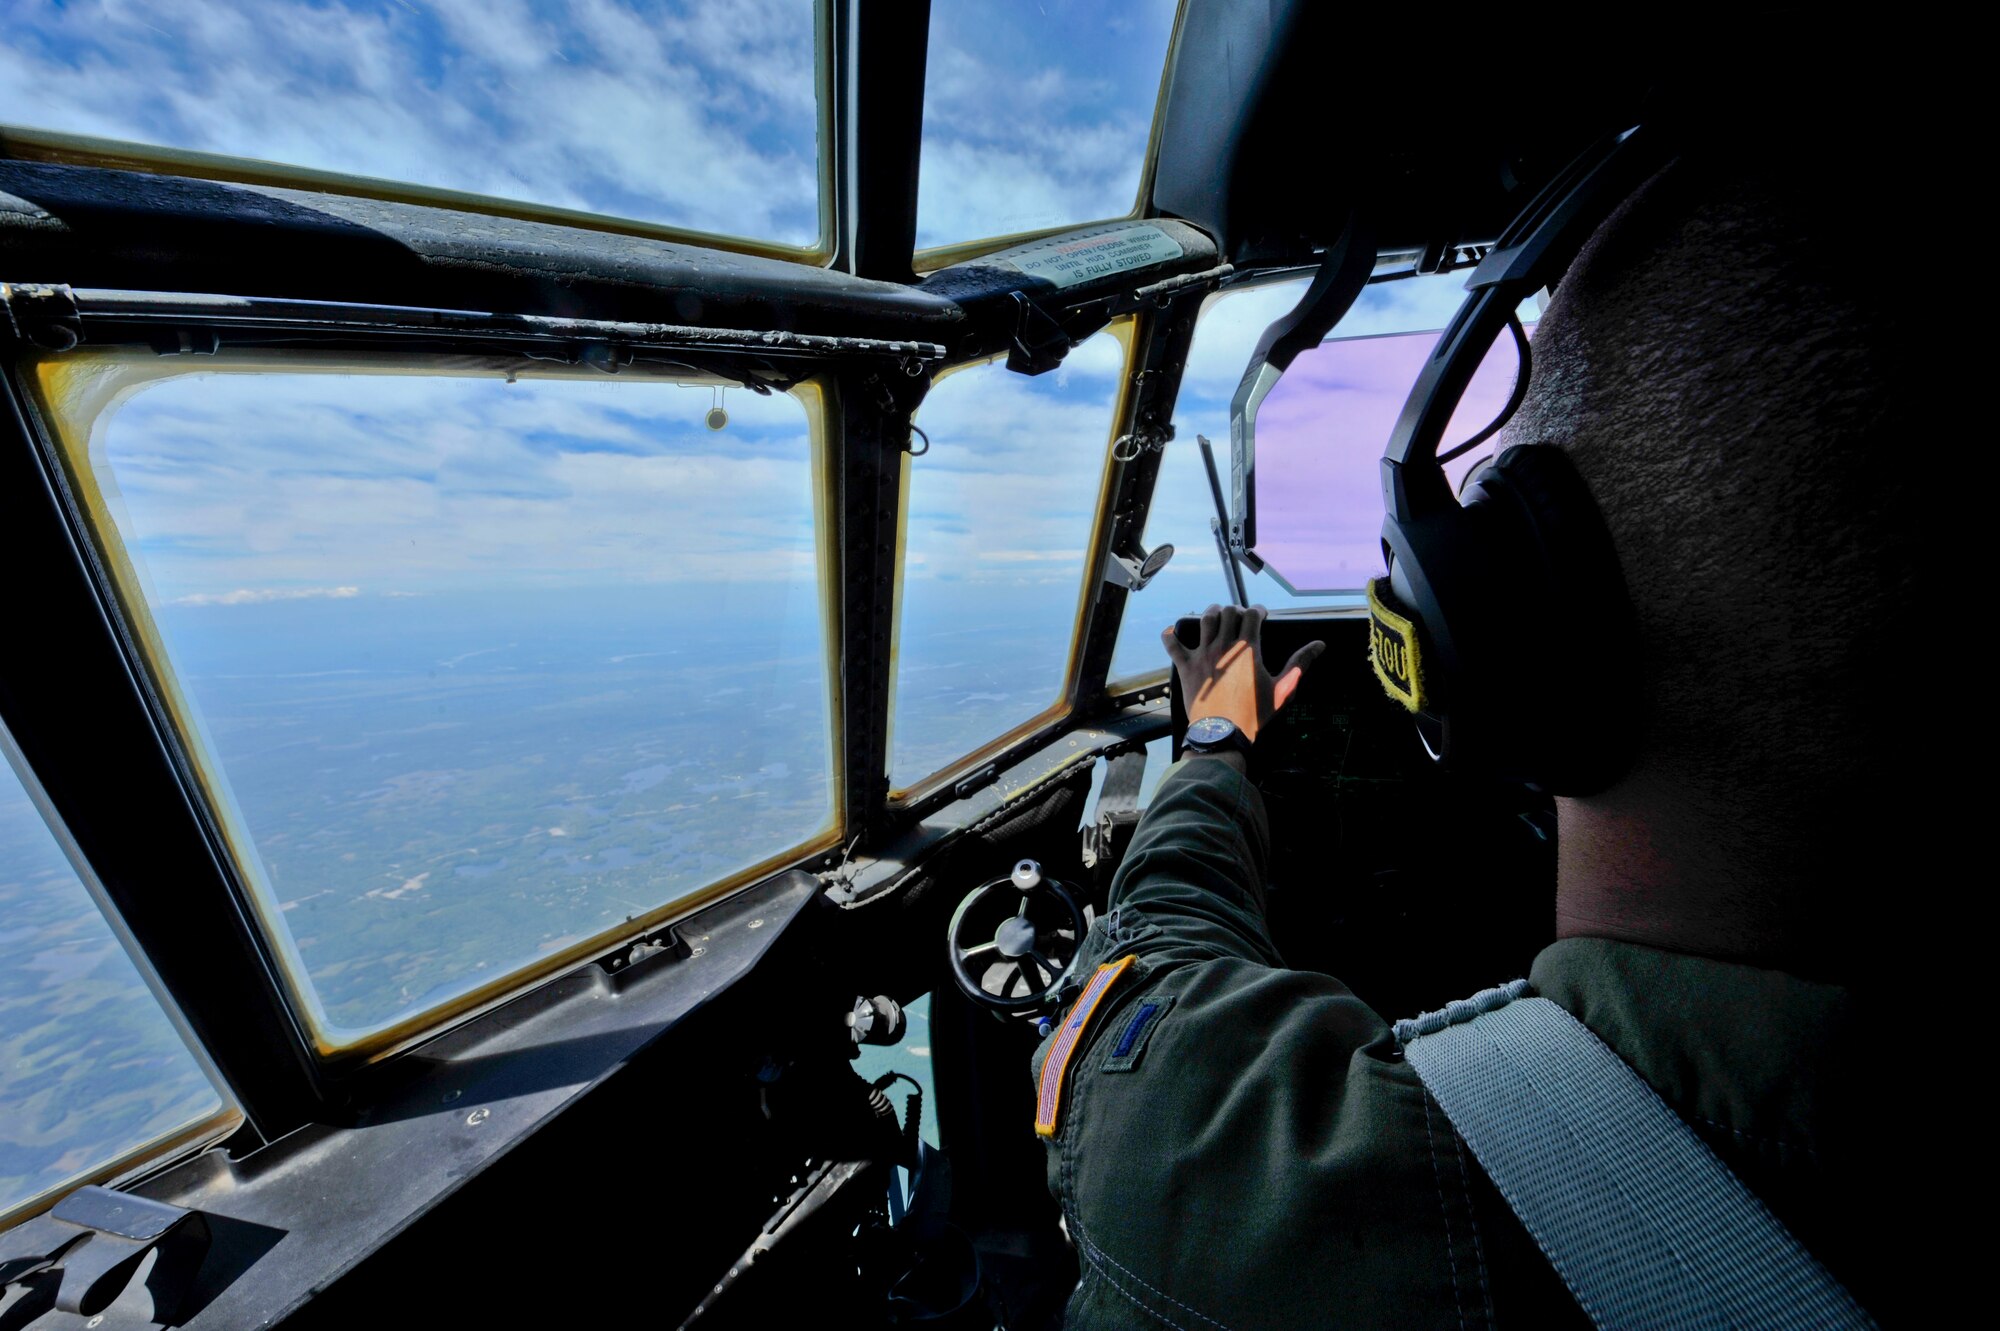 U.S. Air Force 1st Lt. Joshua Travis, 41st Airlift Squadron C-130J pilot, flies a C-130J July 17, 2016, over Alaska. C-130J aircrews from the 41st AS routinely travel across the world to ensure combat airlift can be executed globally in a moment’s notice. (U.S. Air Force photo by Senior Airman Stephanie Serrano)